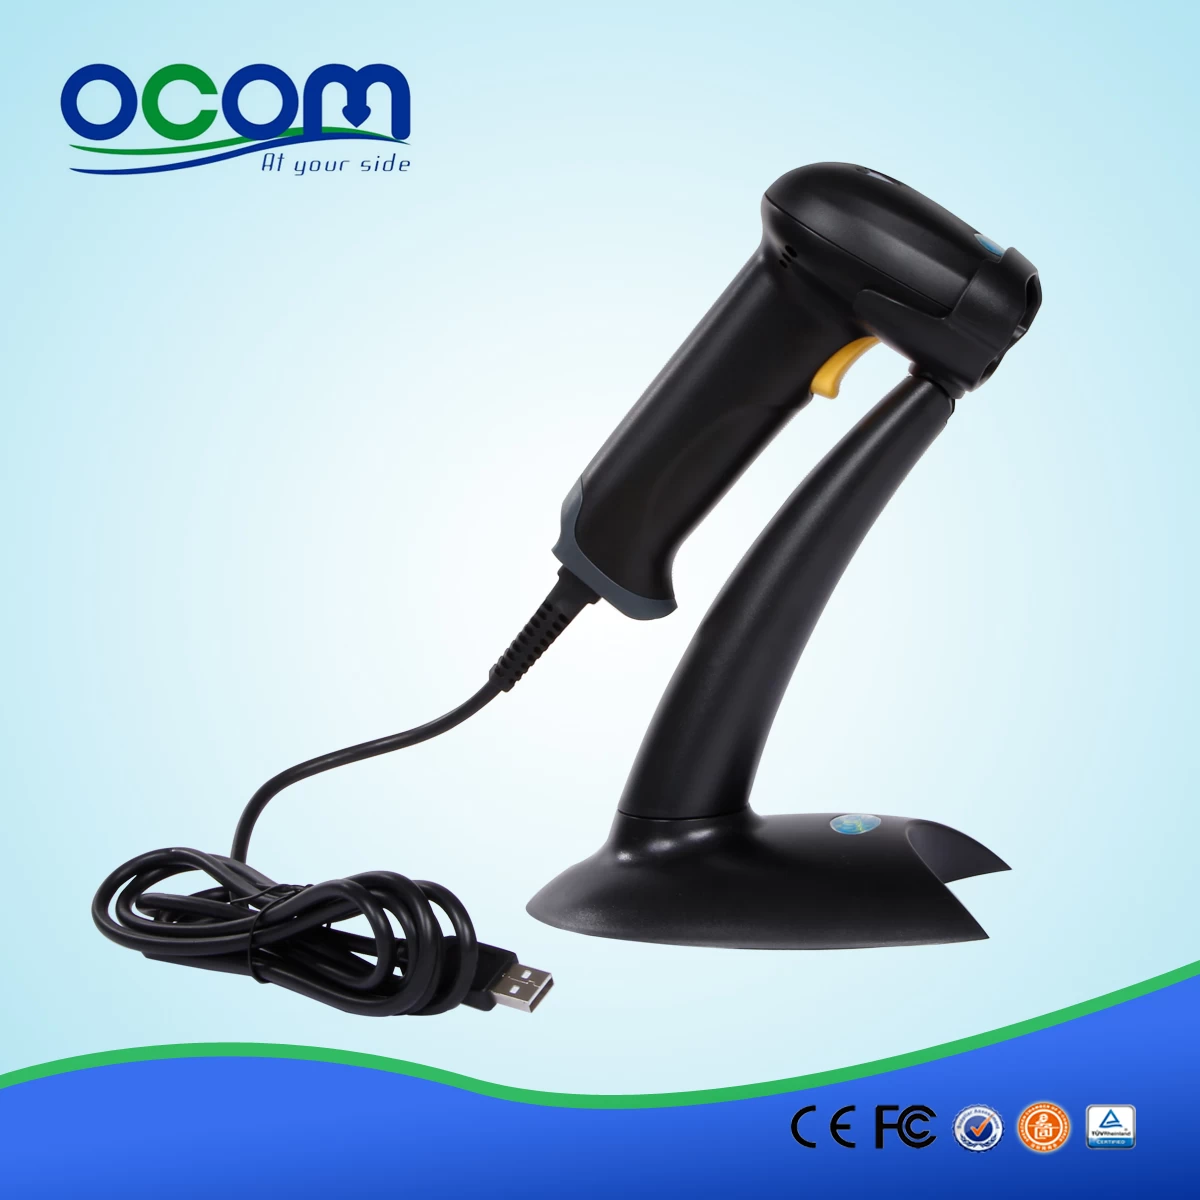 Fast speed auto sense barcode scanner made in China